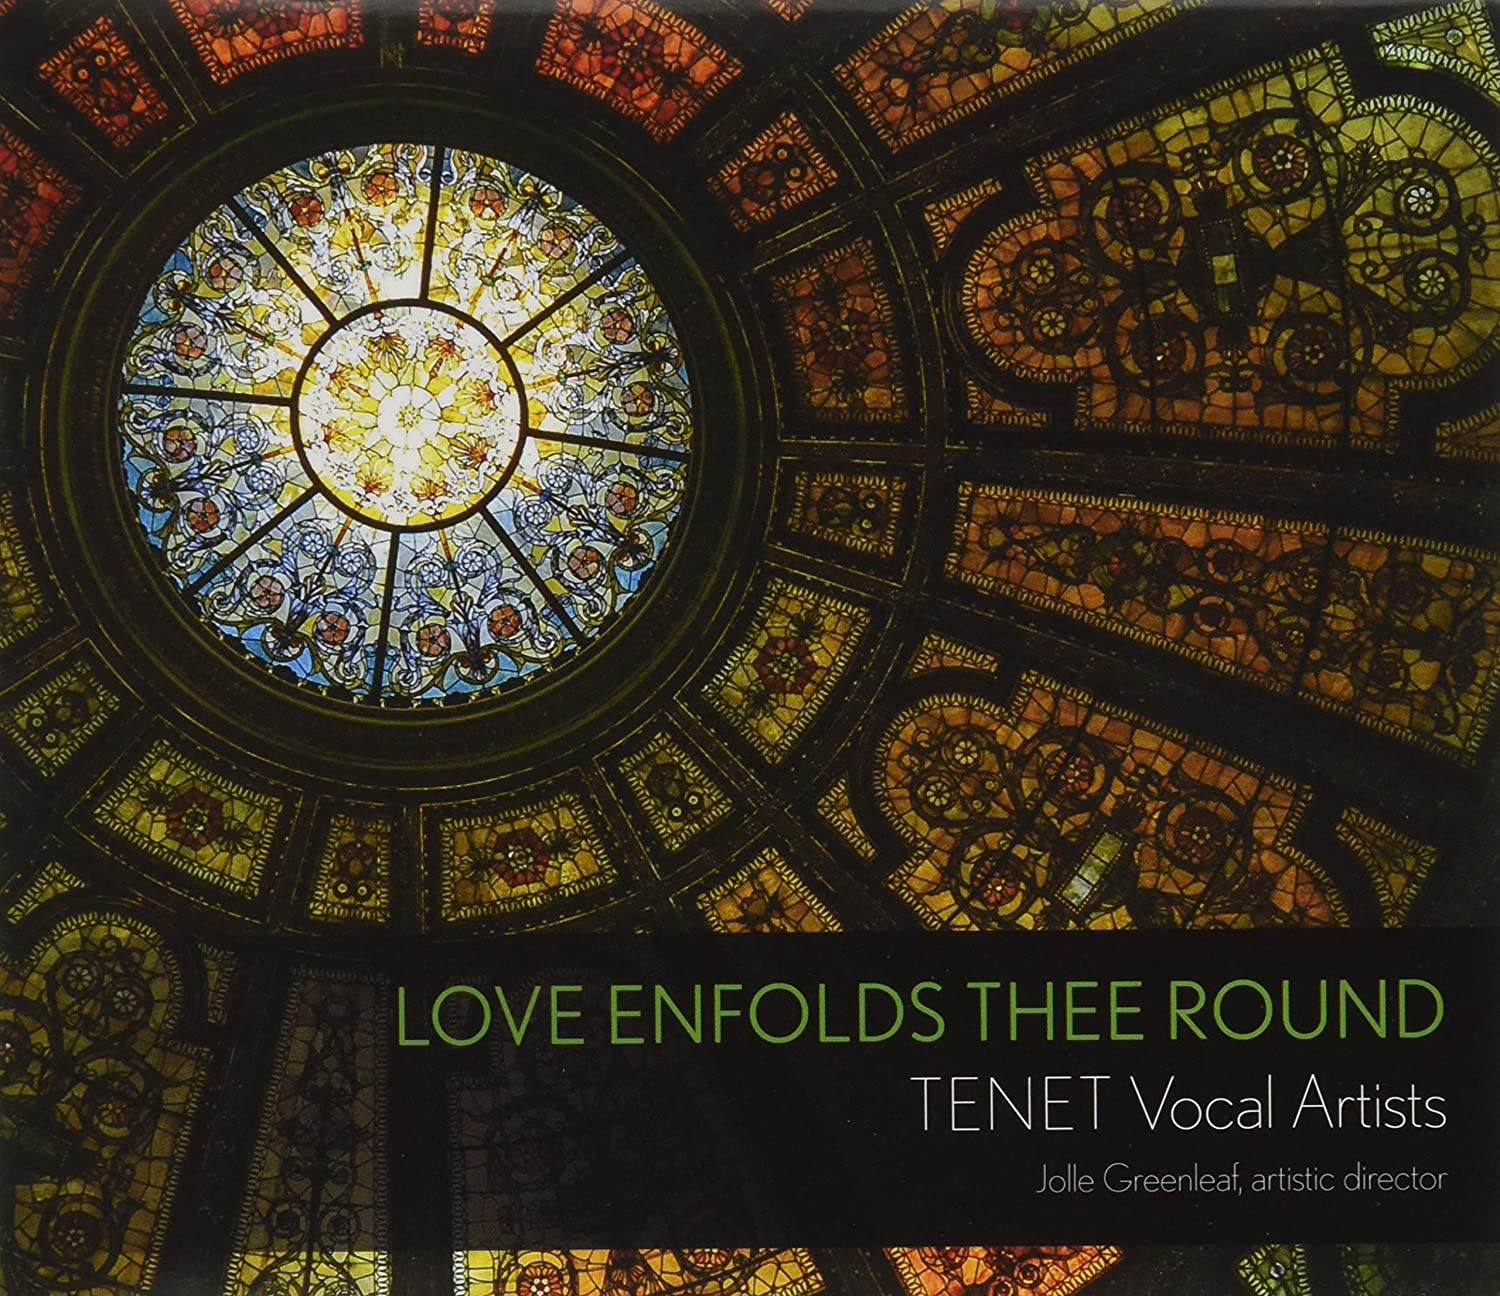 CD cover Love enfolds thee round TENET